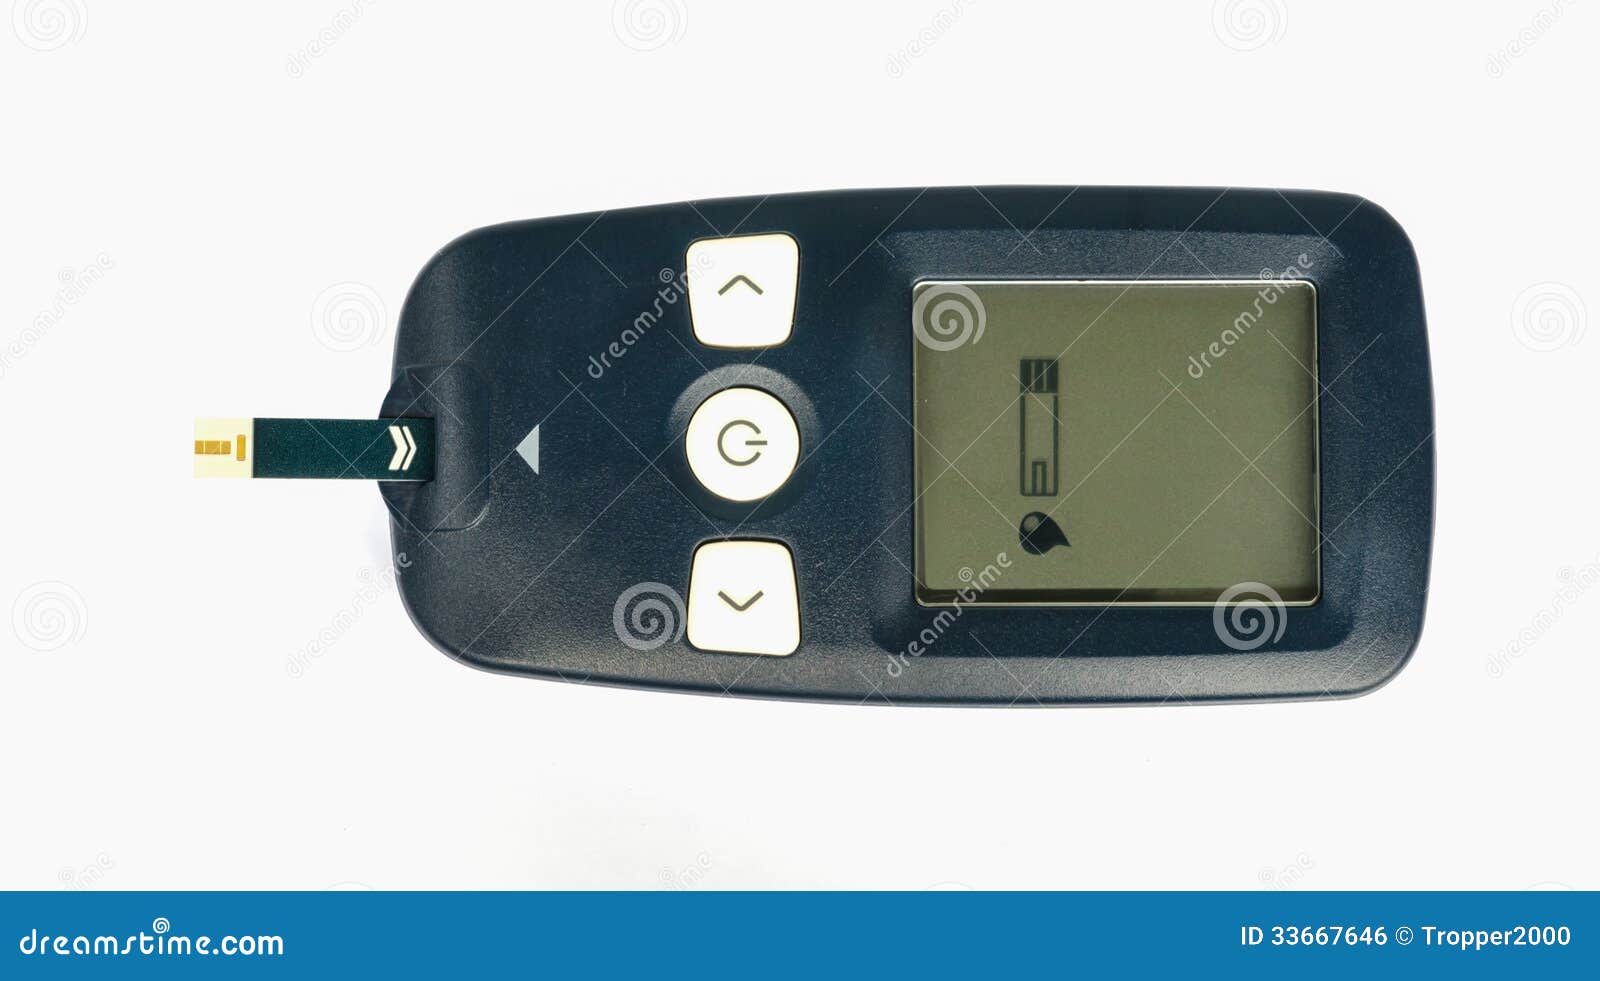 clipart blood glucose monitor - photo #33